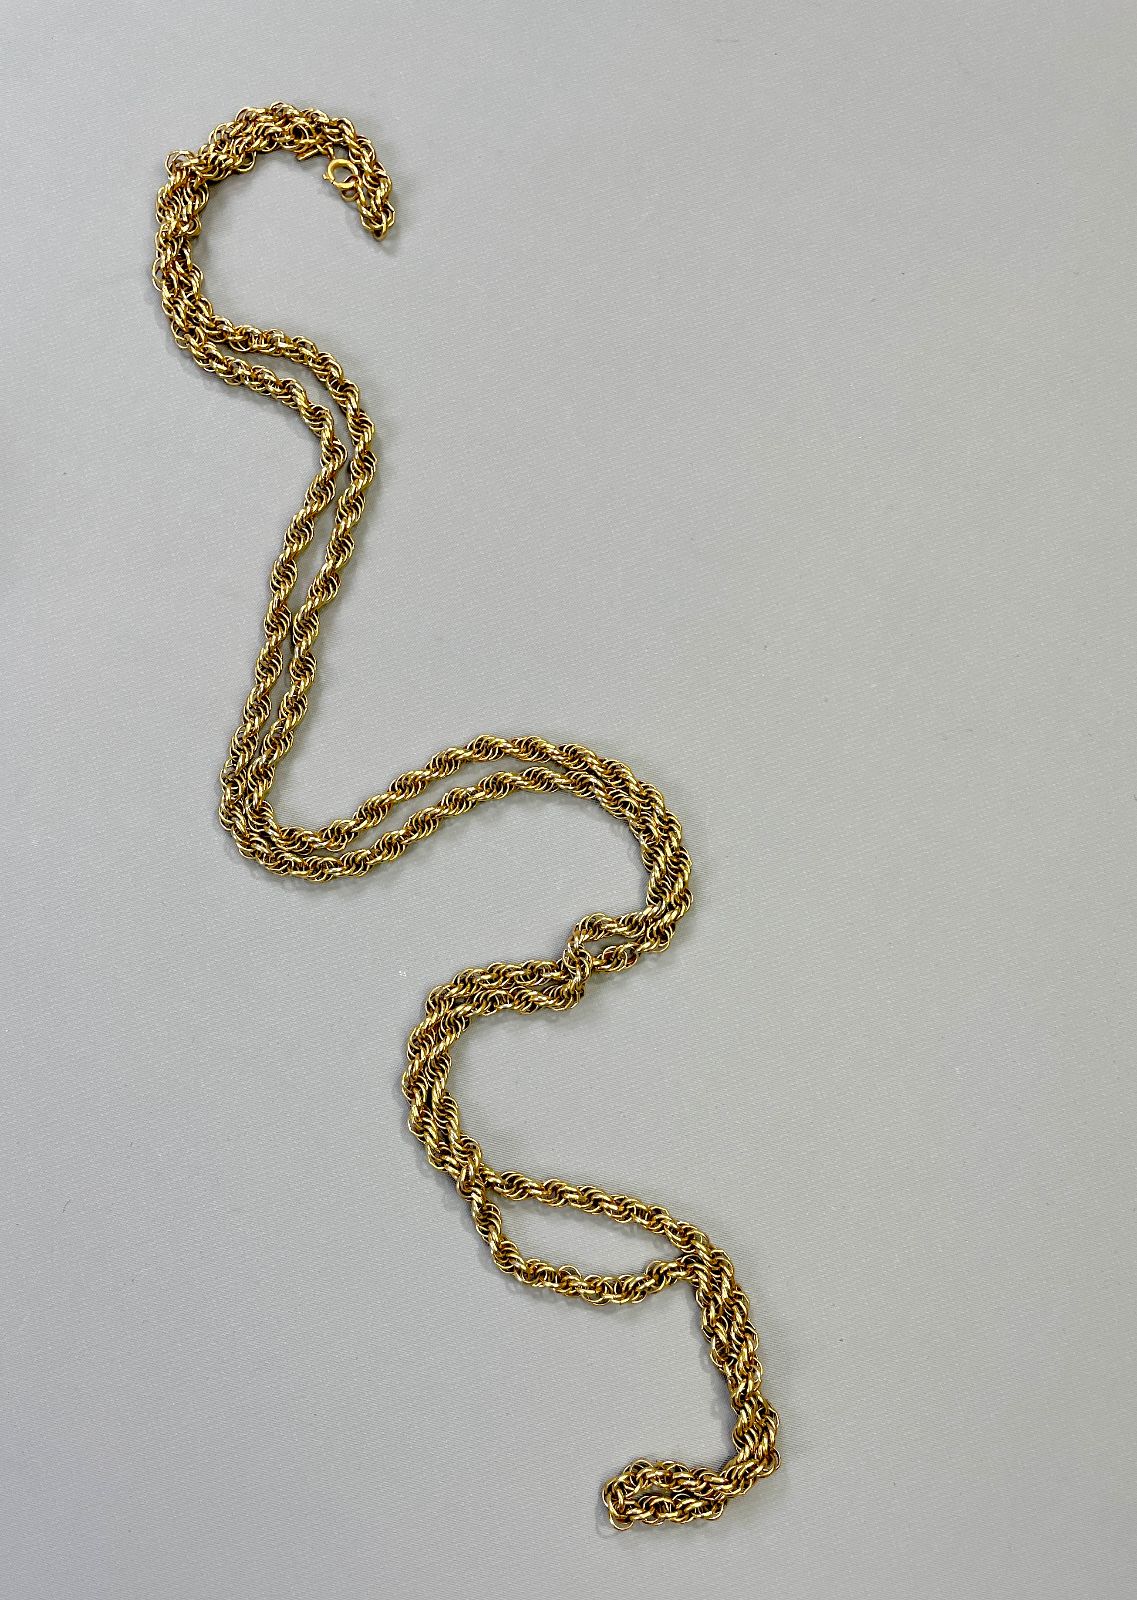 product details: 1970S SUPER LONG CHAIN NECKLACE *COULD BE CHAIN HARNESS TOO! photo